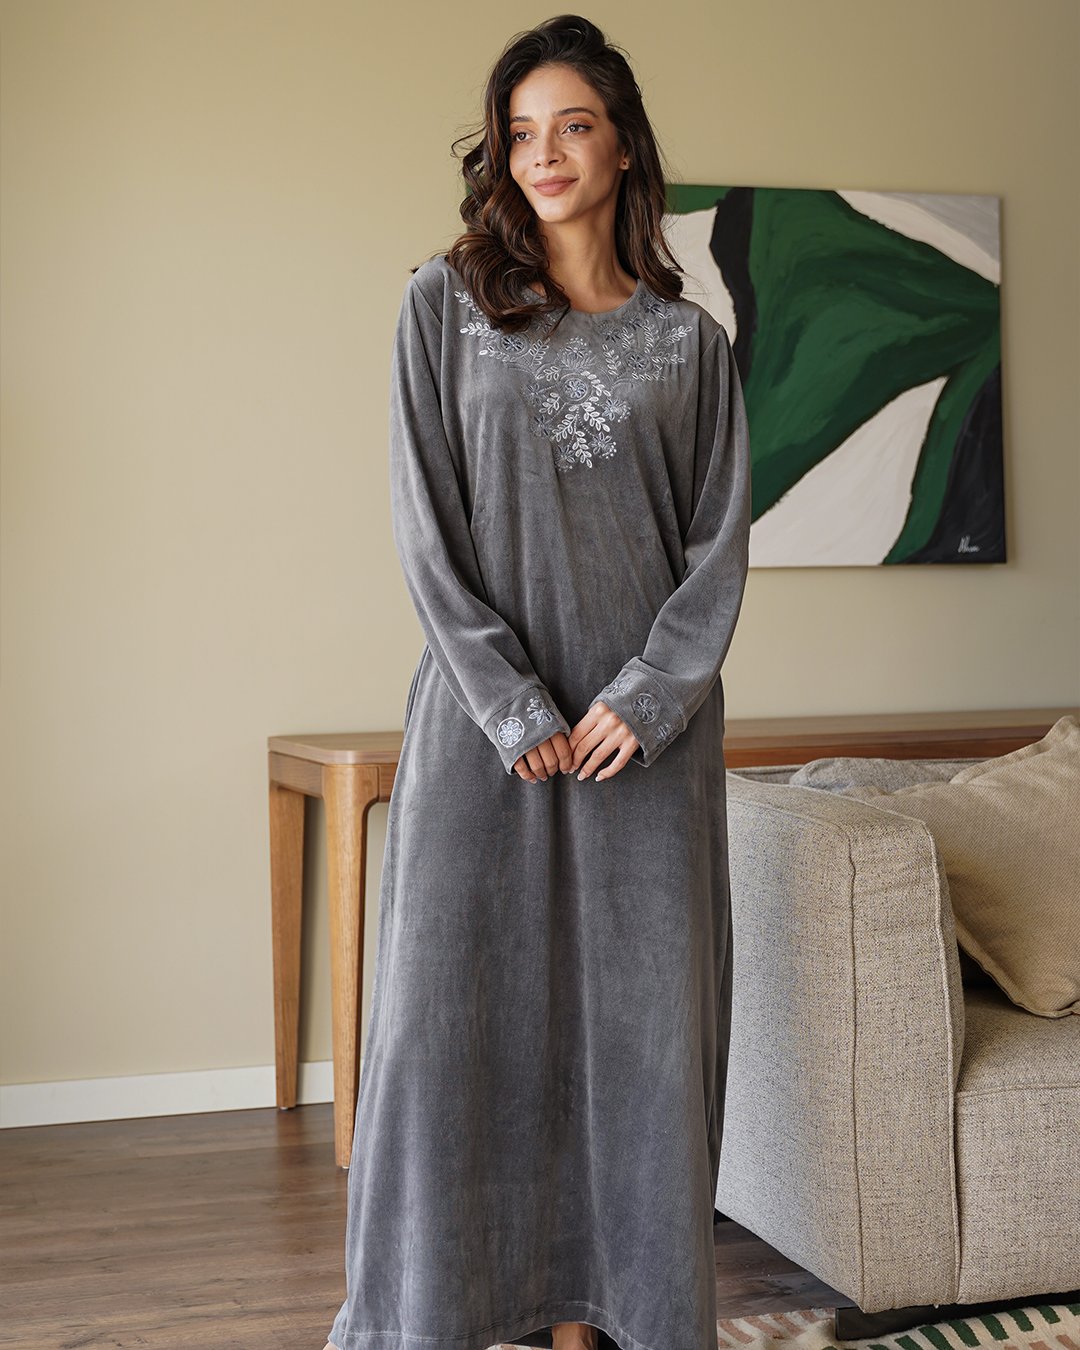 Women's nightgown, zippered in the back, velor embroidery